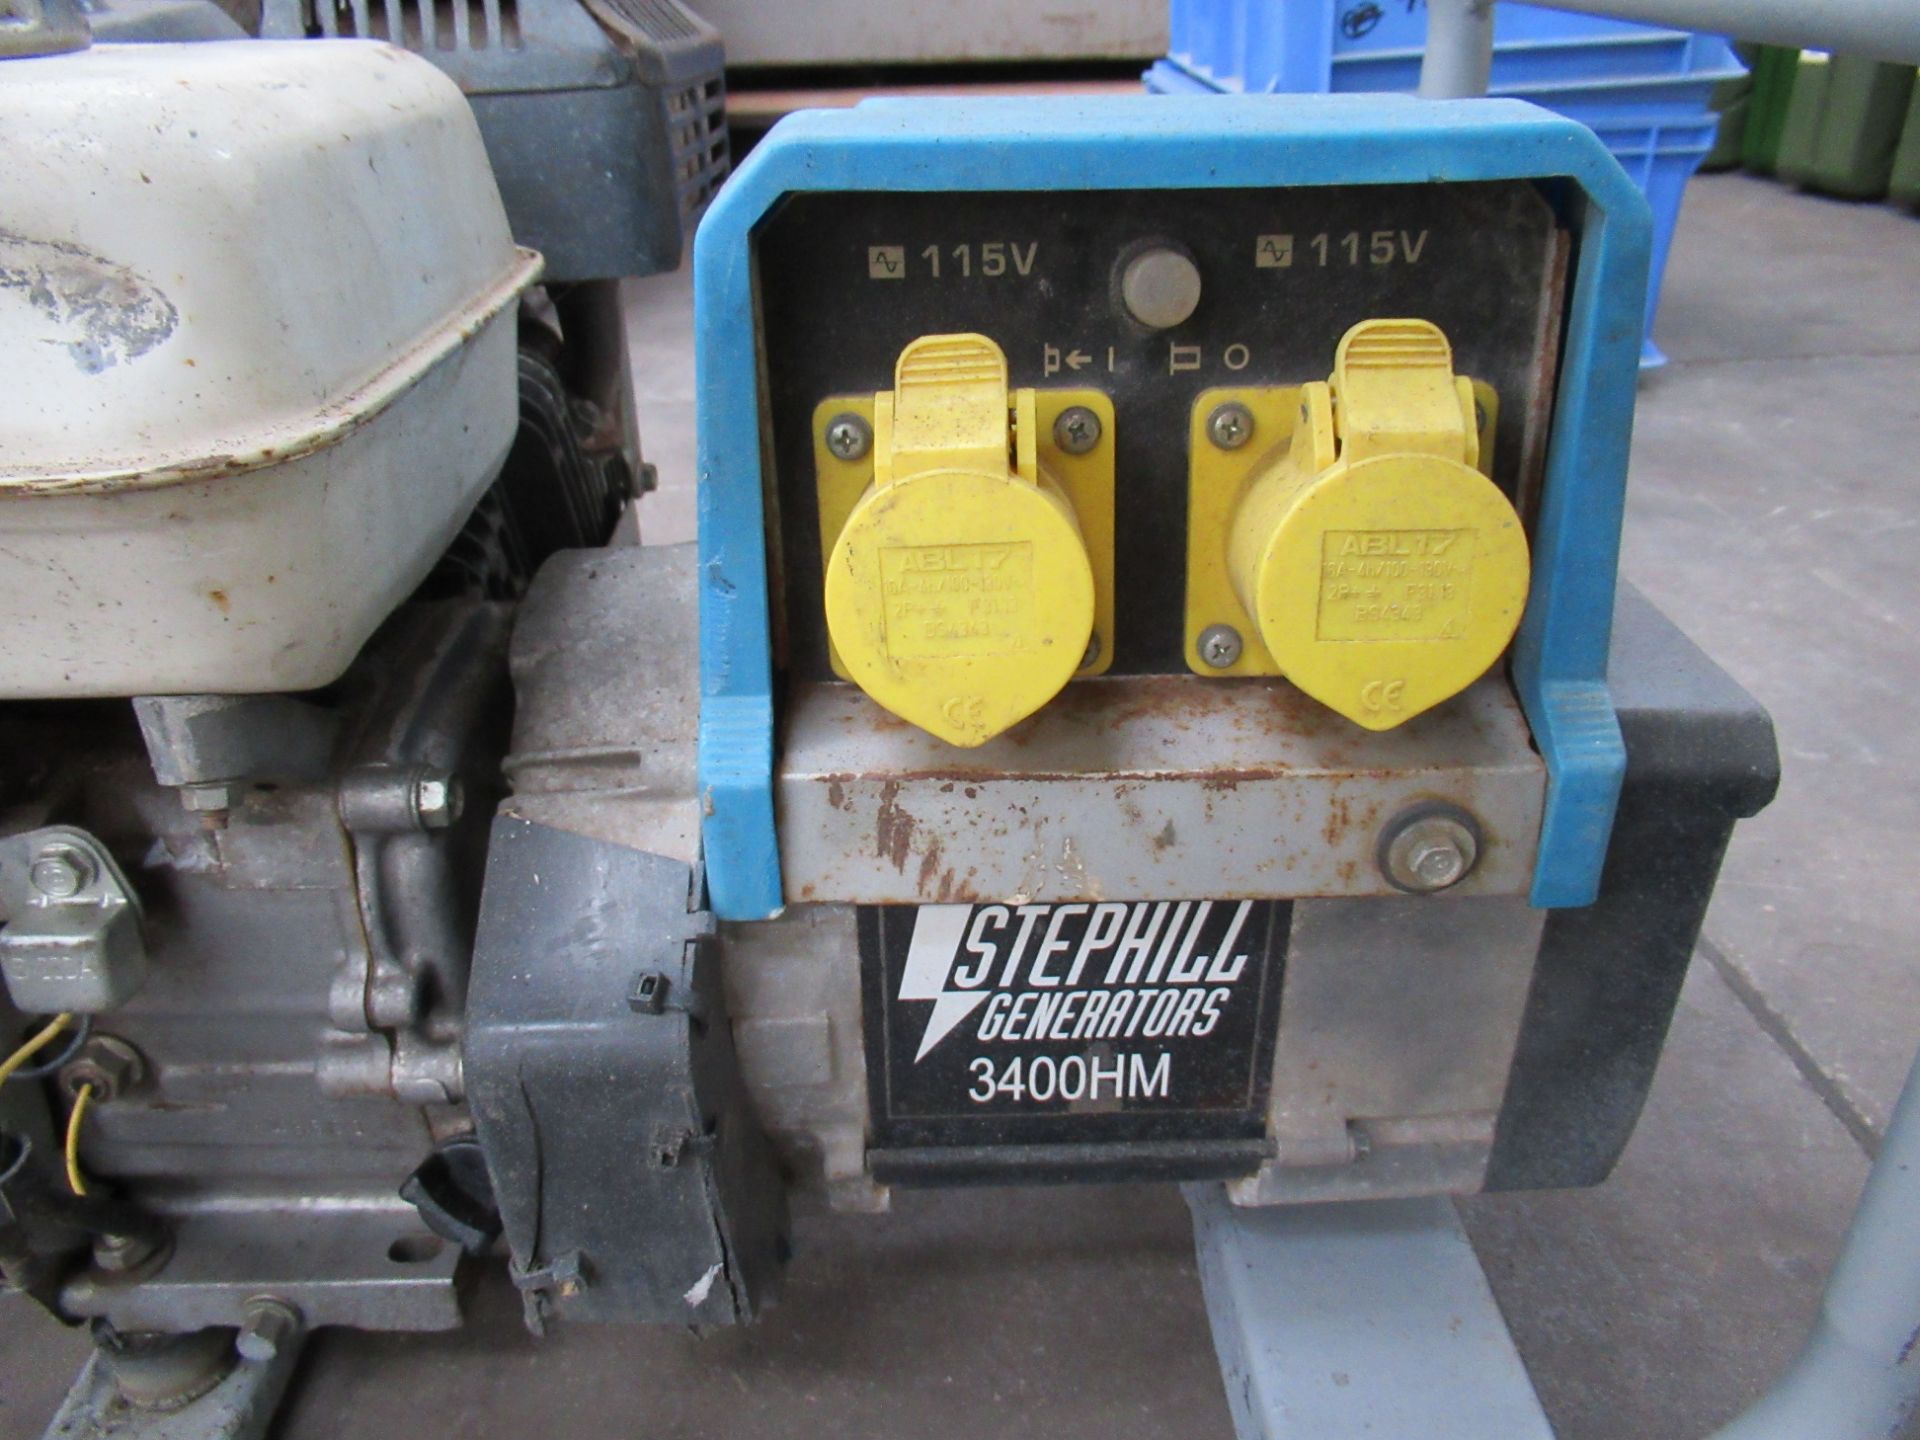 A Stephill 3400HM 110V Generator - Image 2 of 5